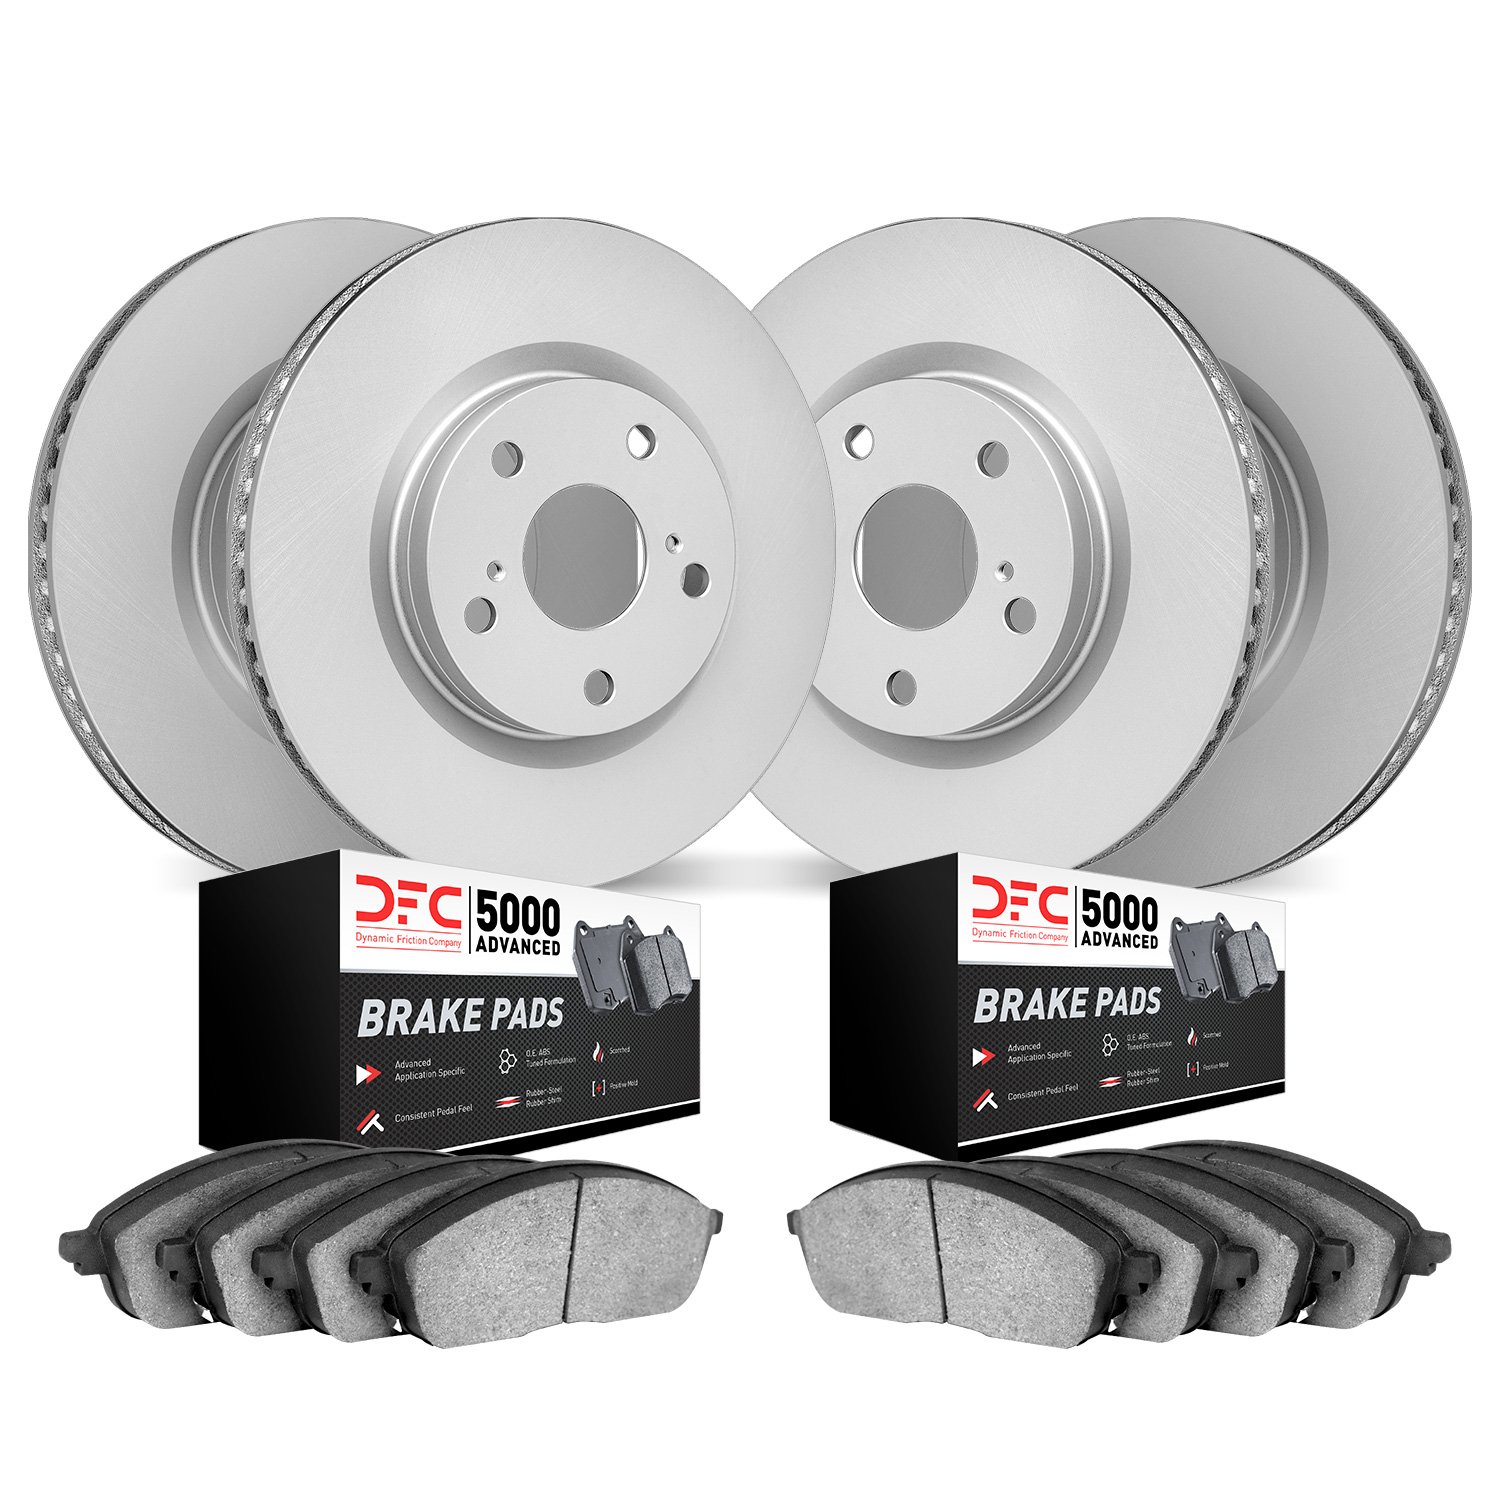 4504-63052 Geospec Brake Rotors w/5000 Advanced Brake Pads Kit, 2010-2017 Mercedes-Benz, Position: Front and Rear